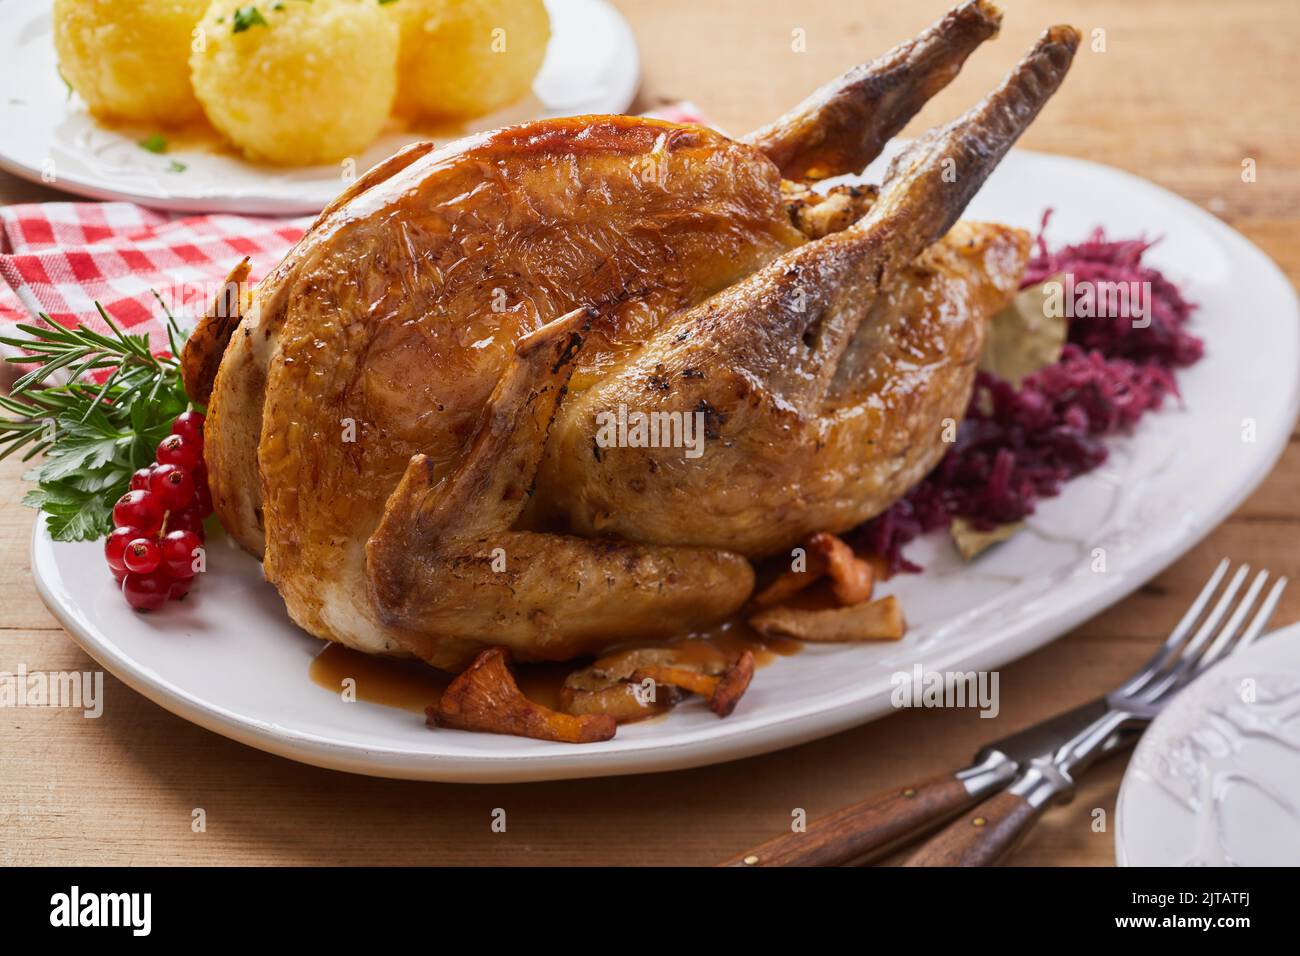 Delicious whole roasted guinea fowl with sauerkraut served with herbs and red currant berries on plate during lunch Stock Photo